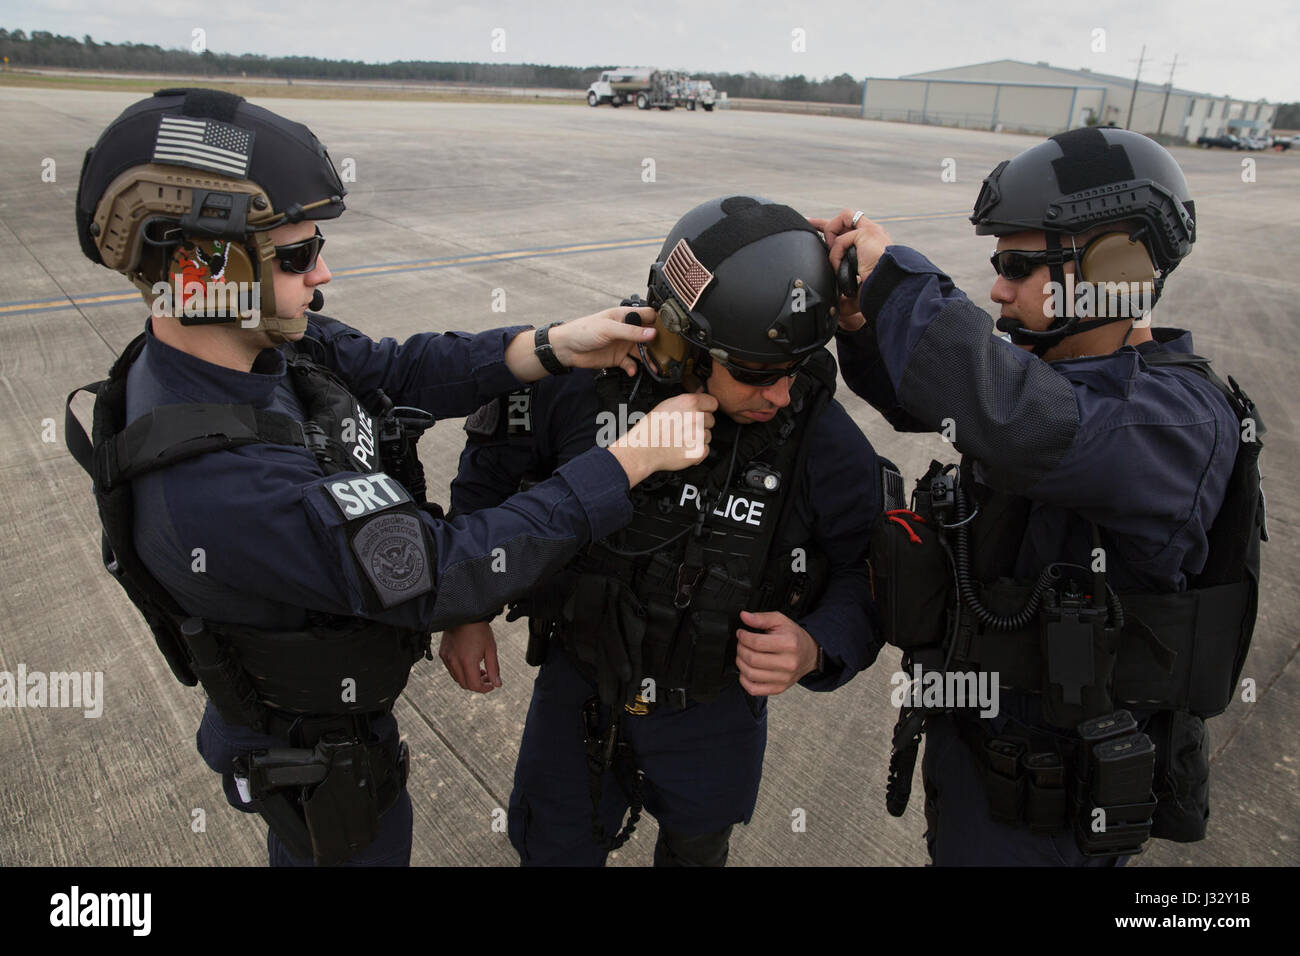 Members of the U.S. Customs and Border Protection, Office of Field Operations Special Response Team, suit-up prior to an air-intercept training exercise as they provide airspace security for Super Bowl LI, in Conroe, Texas, Feb. 1, 2017. Units with Air and Marine Operations and Office of Field Operations teamed up with the Civil Air Patrol  to practice an air-to-air intercept using two AMO UH-60 Black Hawk helicopters and two C-550 Citation jets to track down a simulated incursion into restricted airspace. U.S. Customs and Border Protection Photo by Glenn Fawcett Stock Photo